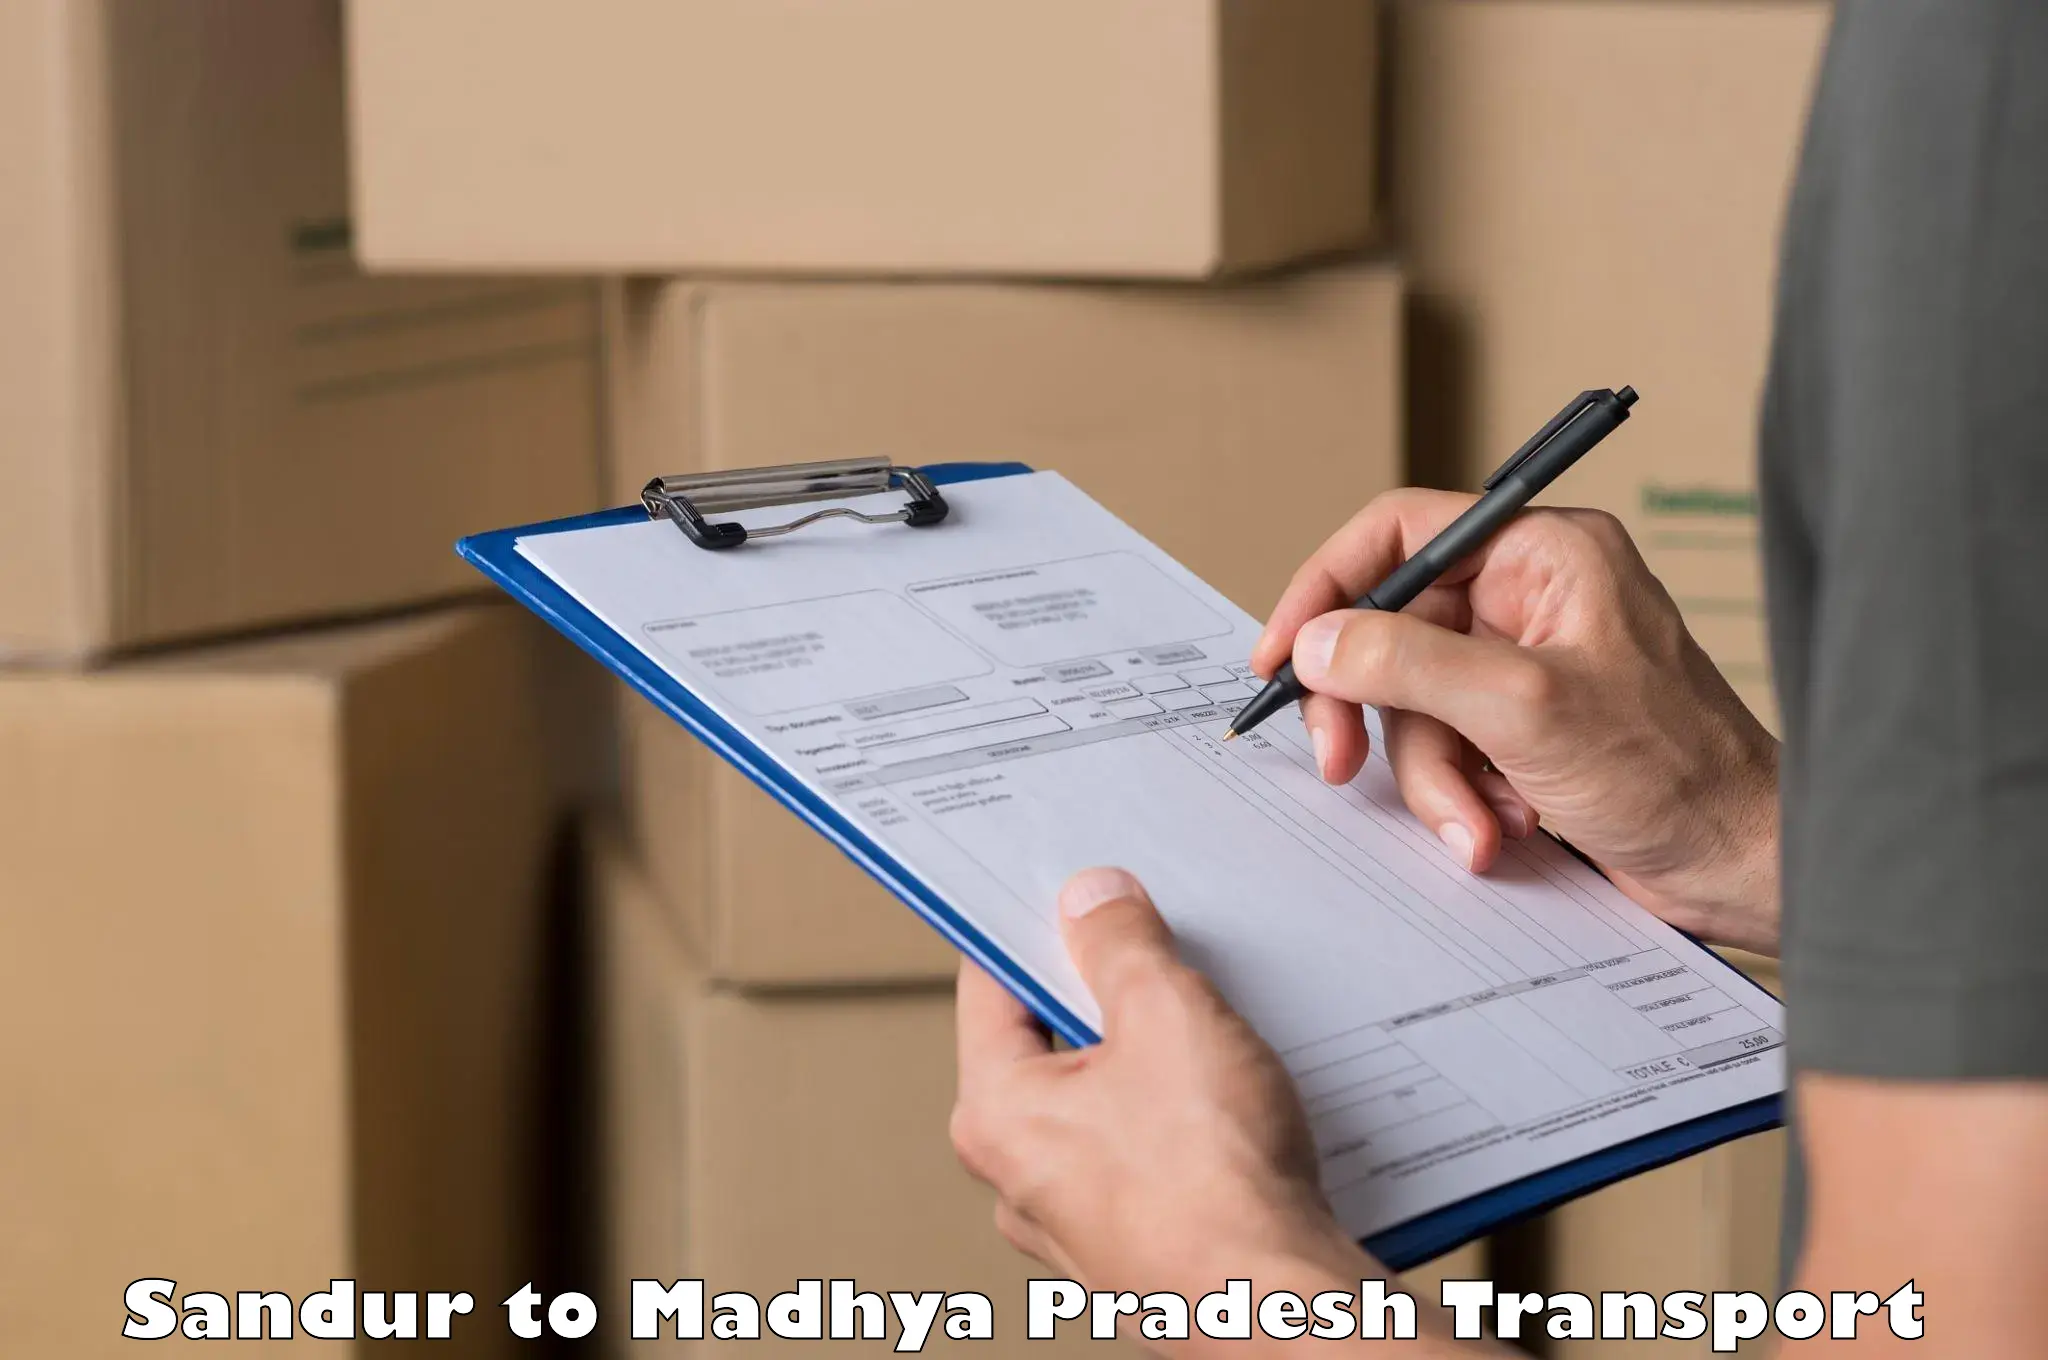 Container transport service Sandur to Indore